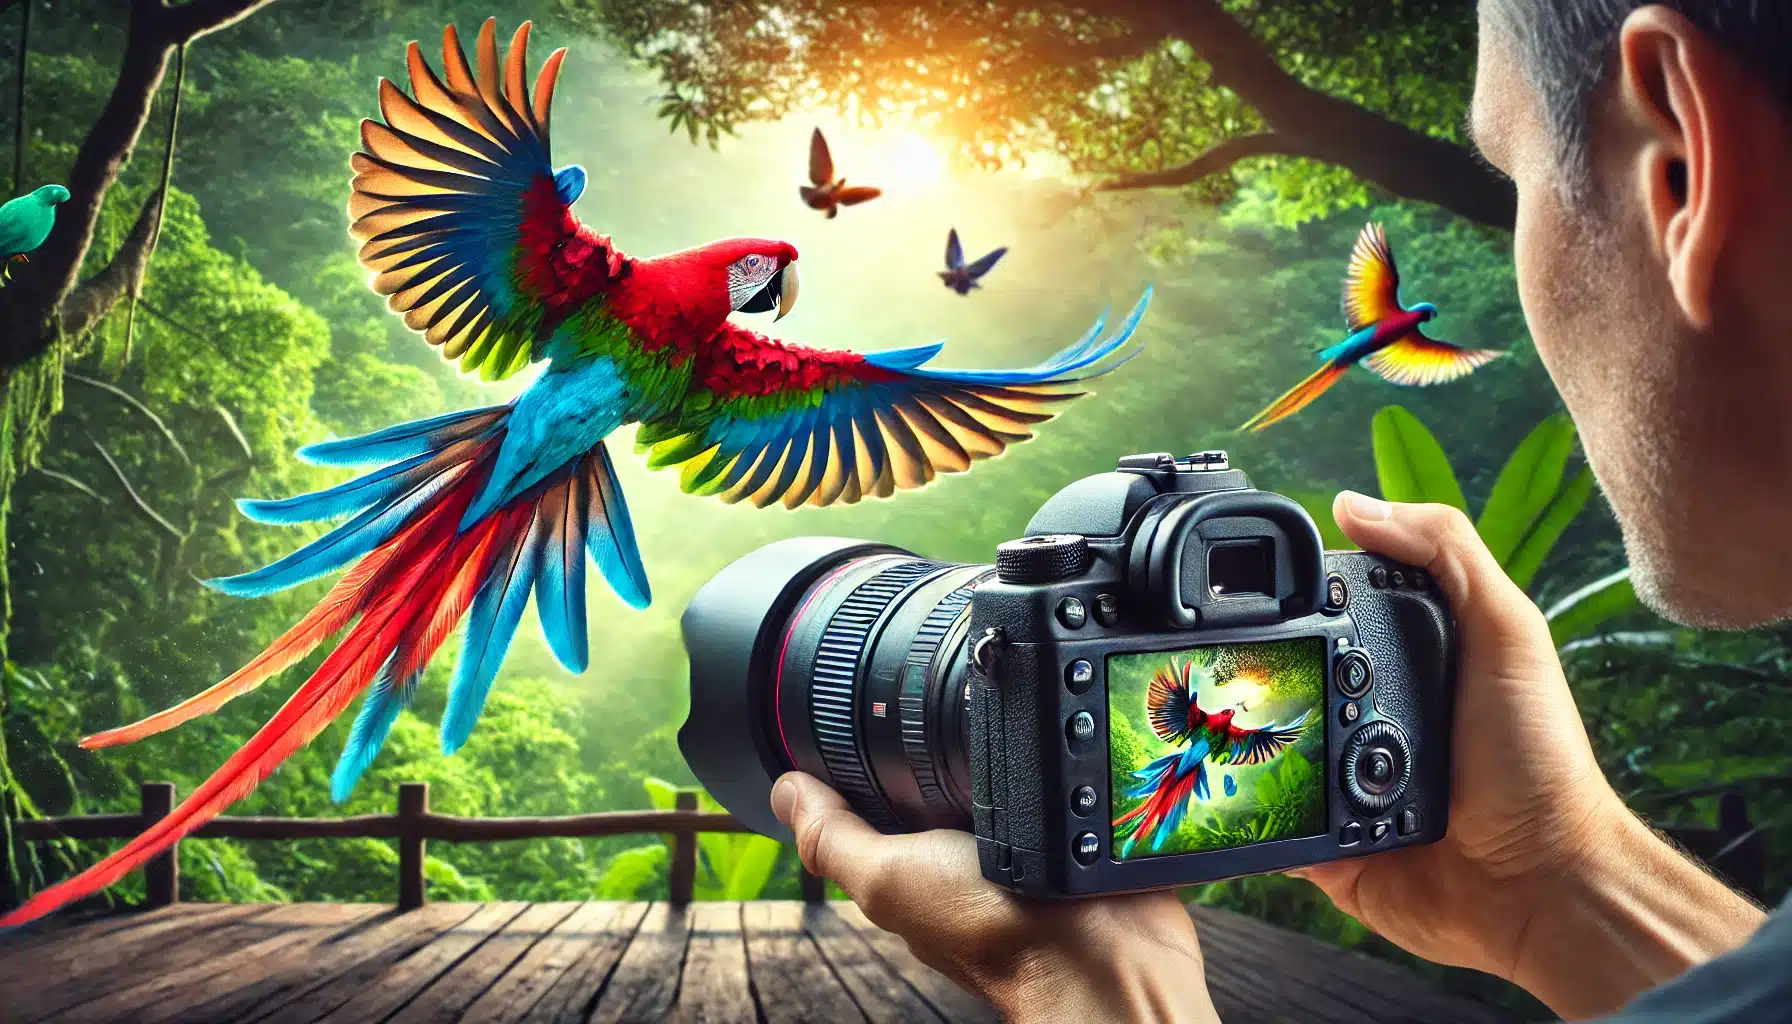 A Shooter capturing Colorful birds in various activities at a nature reserve during golden hour using Bird Photography Guide